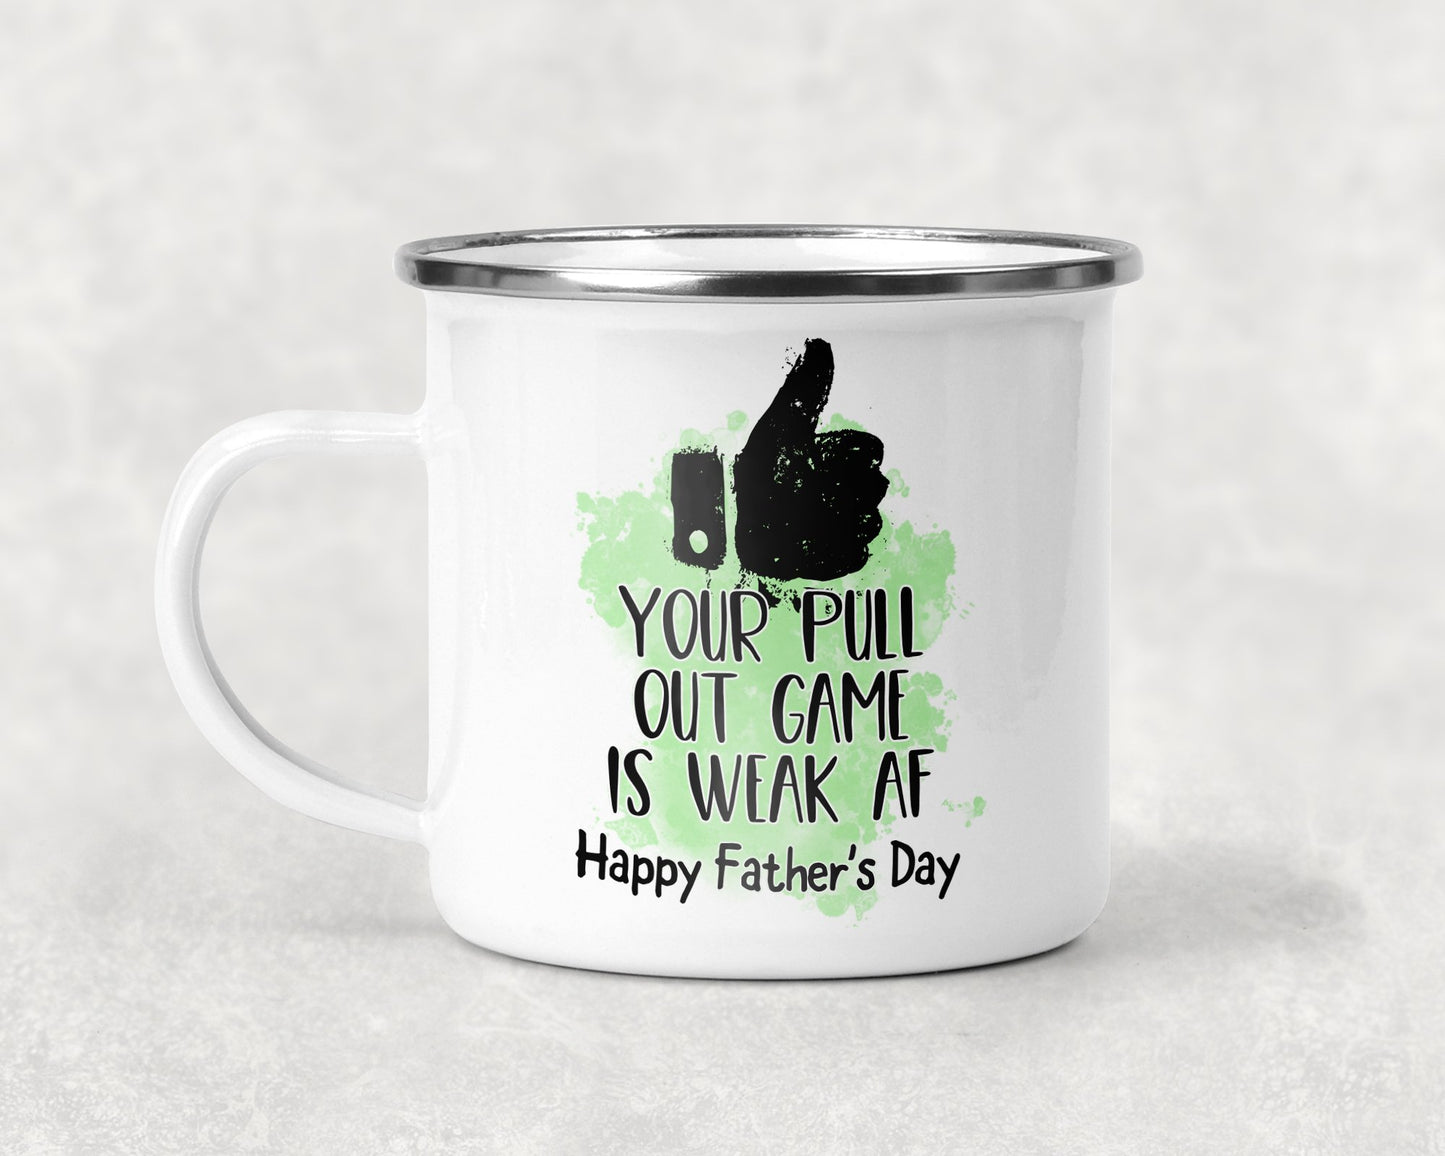 Your Pull Out Game Is Weak Af Happy Fathers Day Mug Coffee